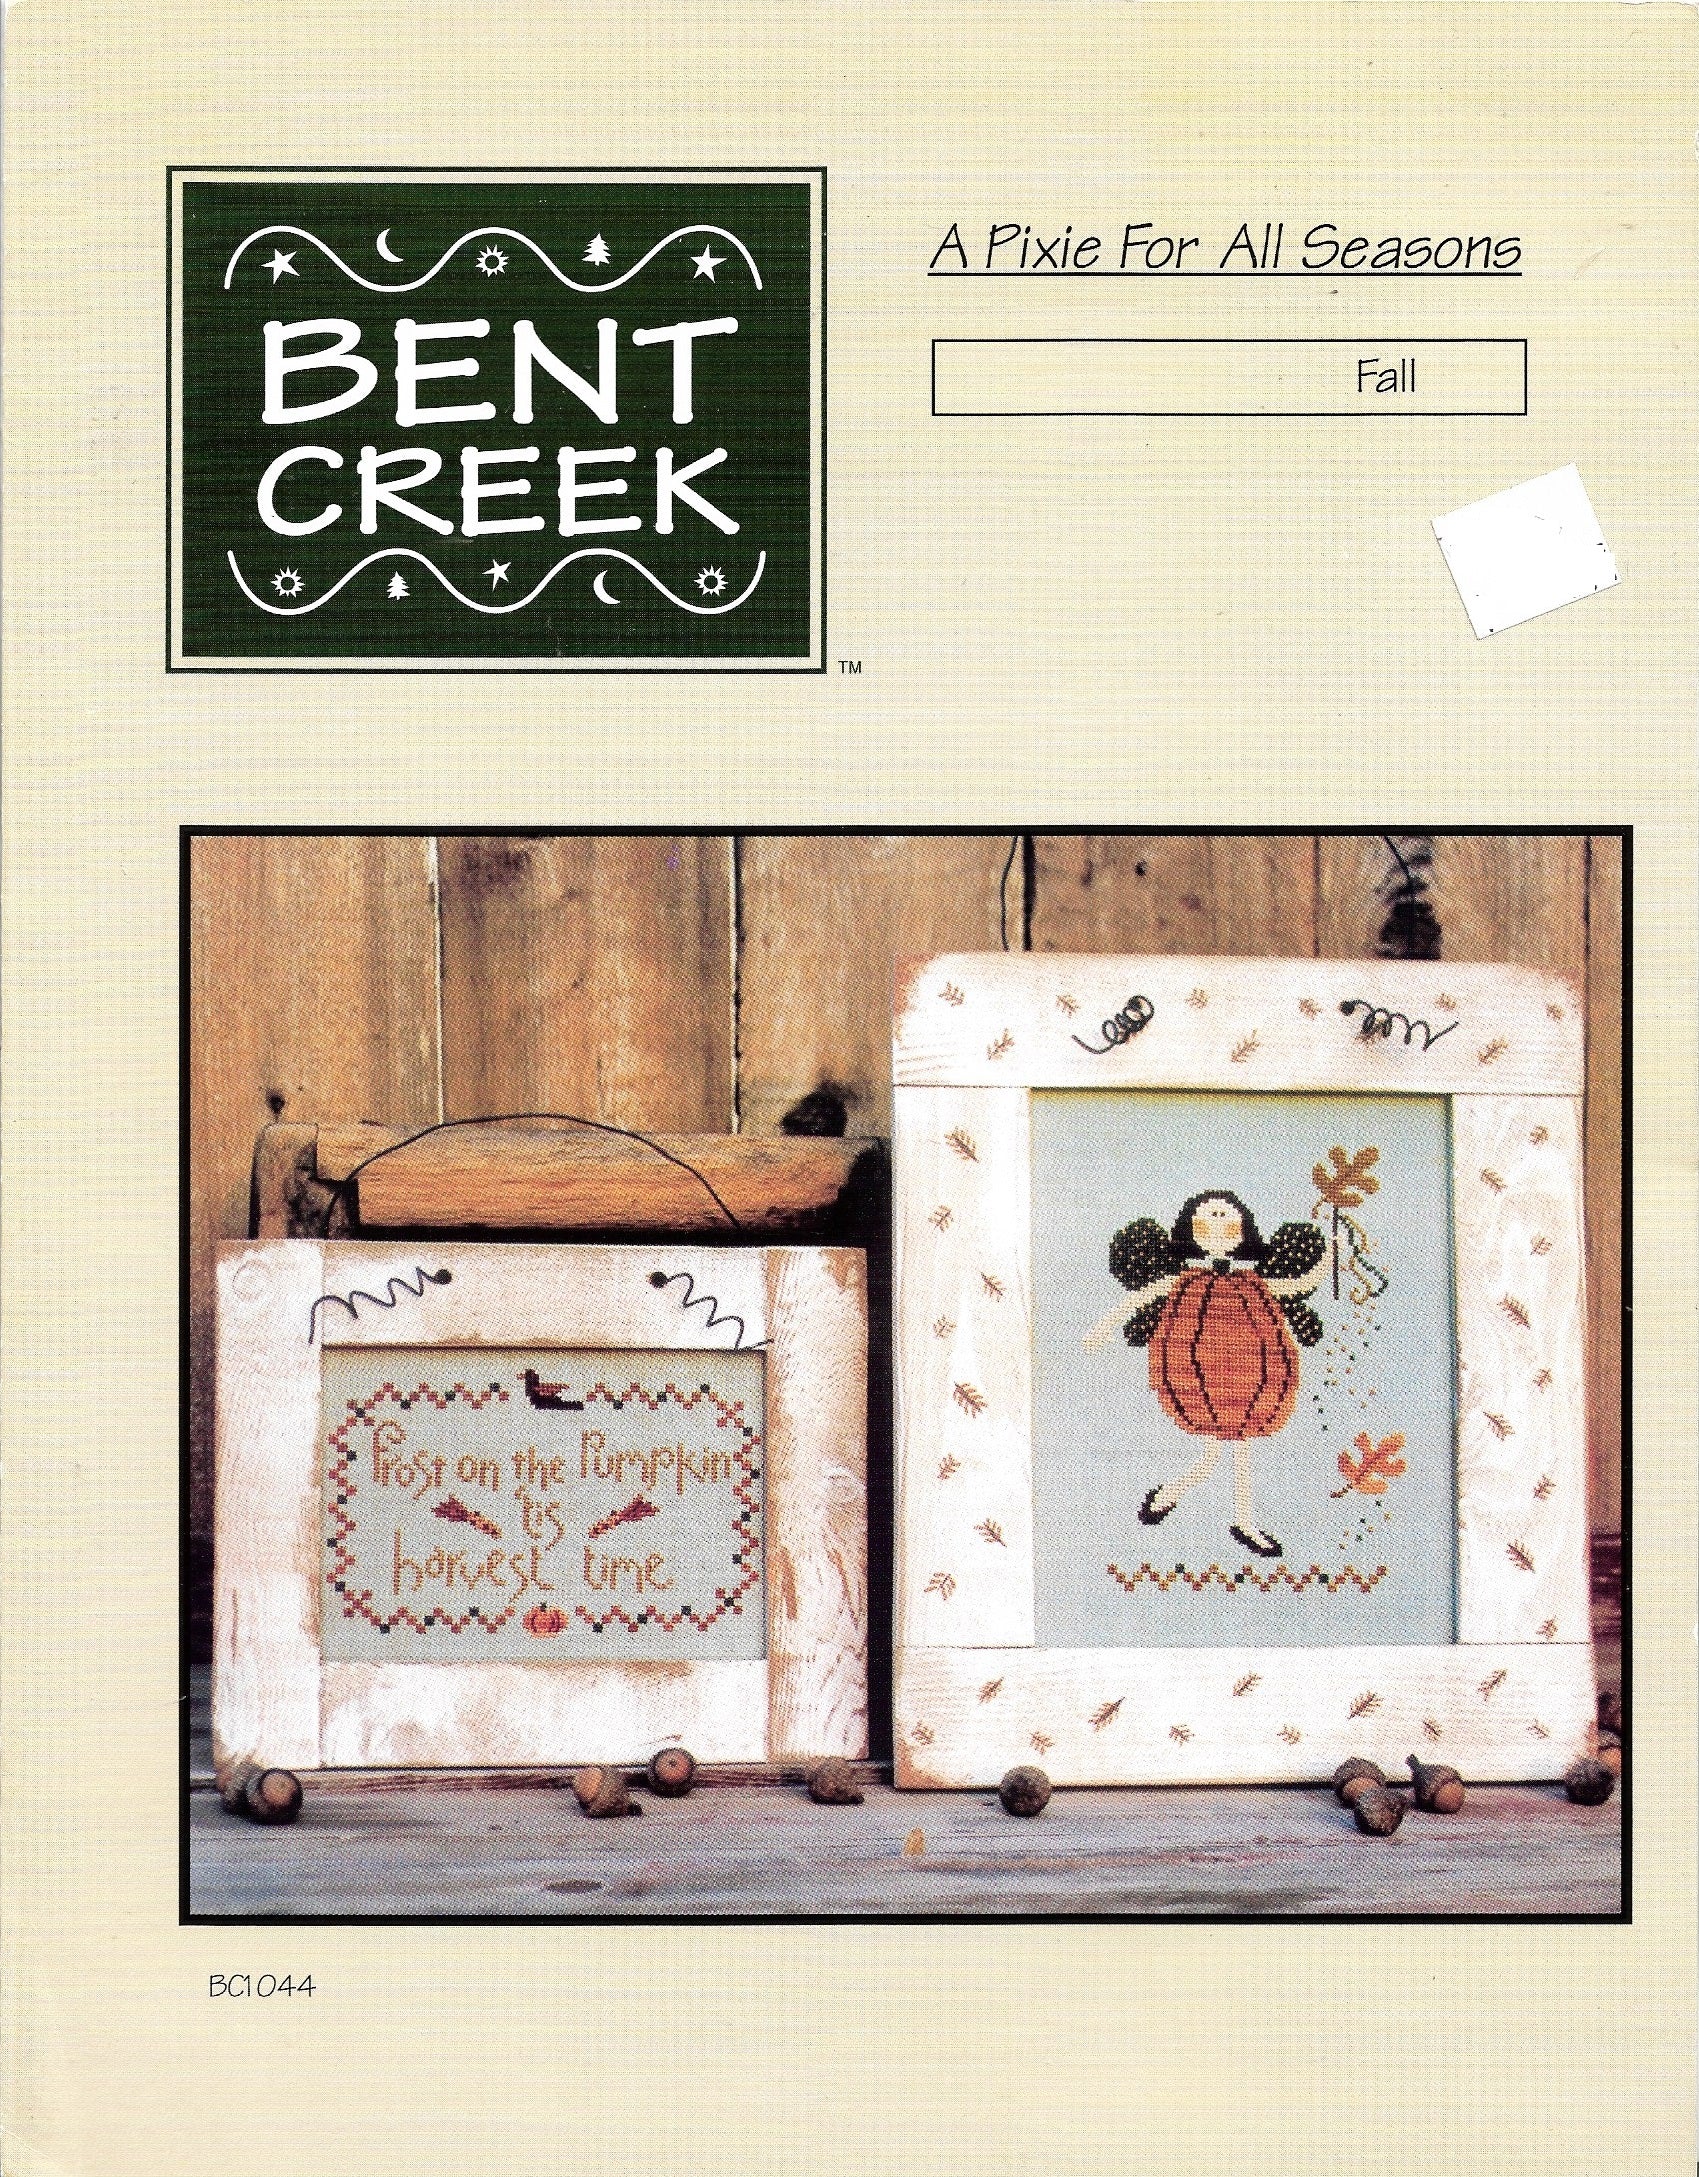 Bent Creek A Pixie For All Seasons - Fall BC1044 cross stitch pattern